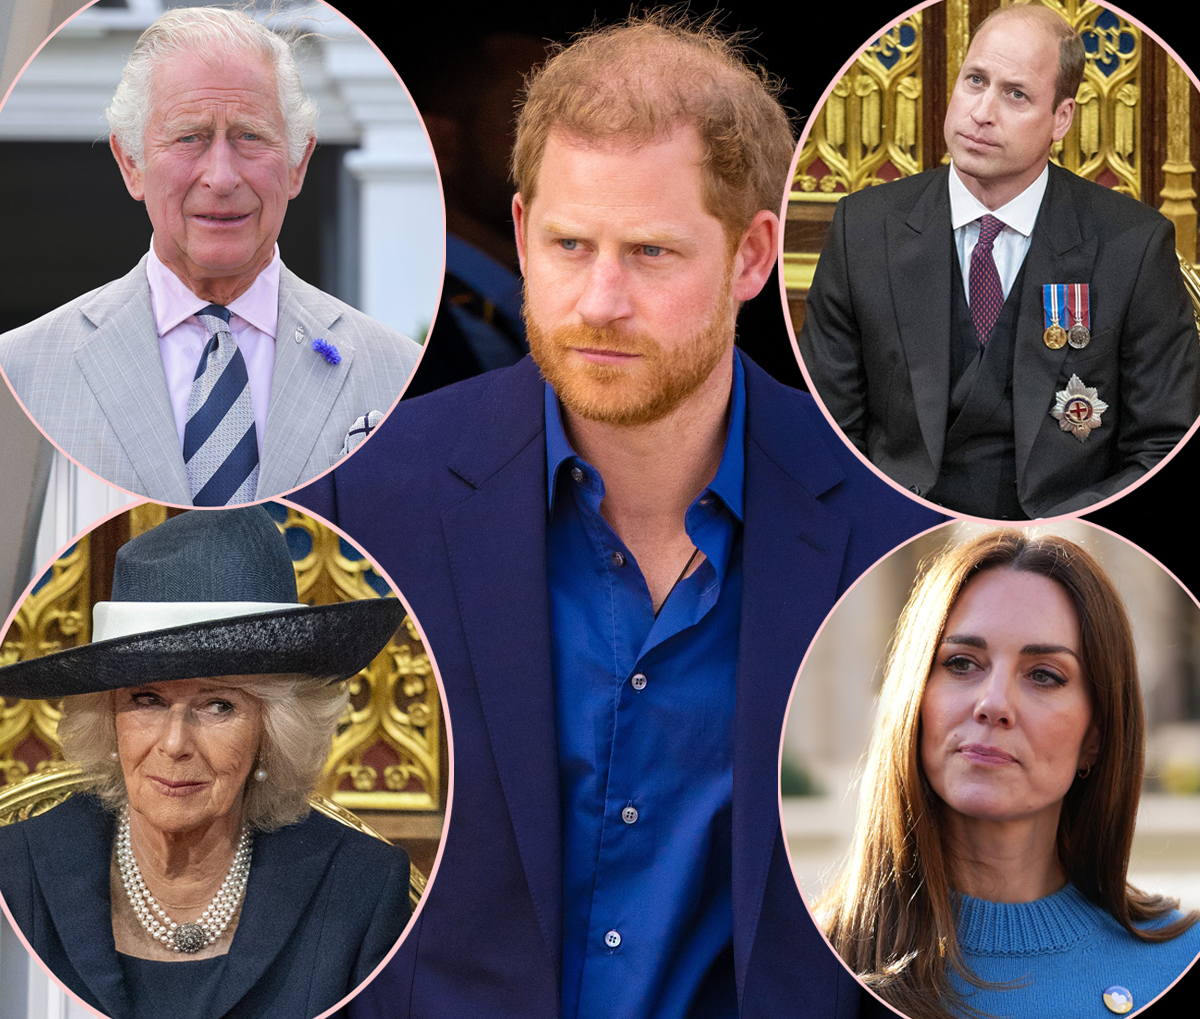 #Royal Family ‘Hugely Nervous’ About Prince Harry’s Upcoming Memoir — Which Can Only Get ‘Nastier’ According To Expert!